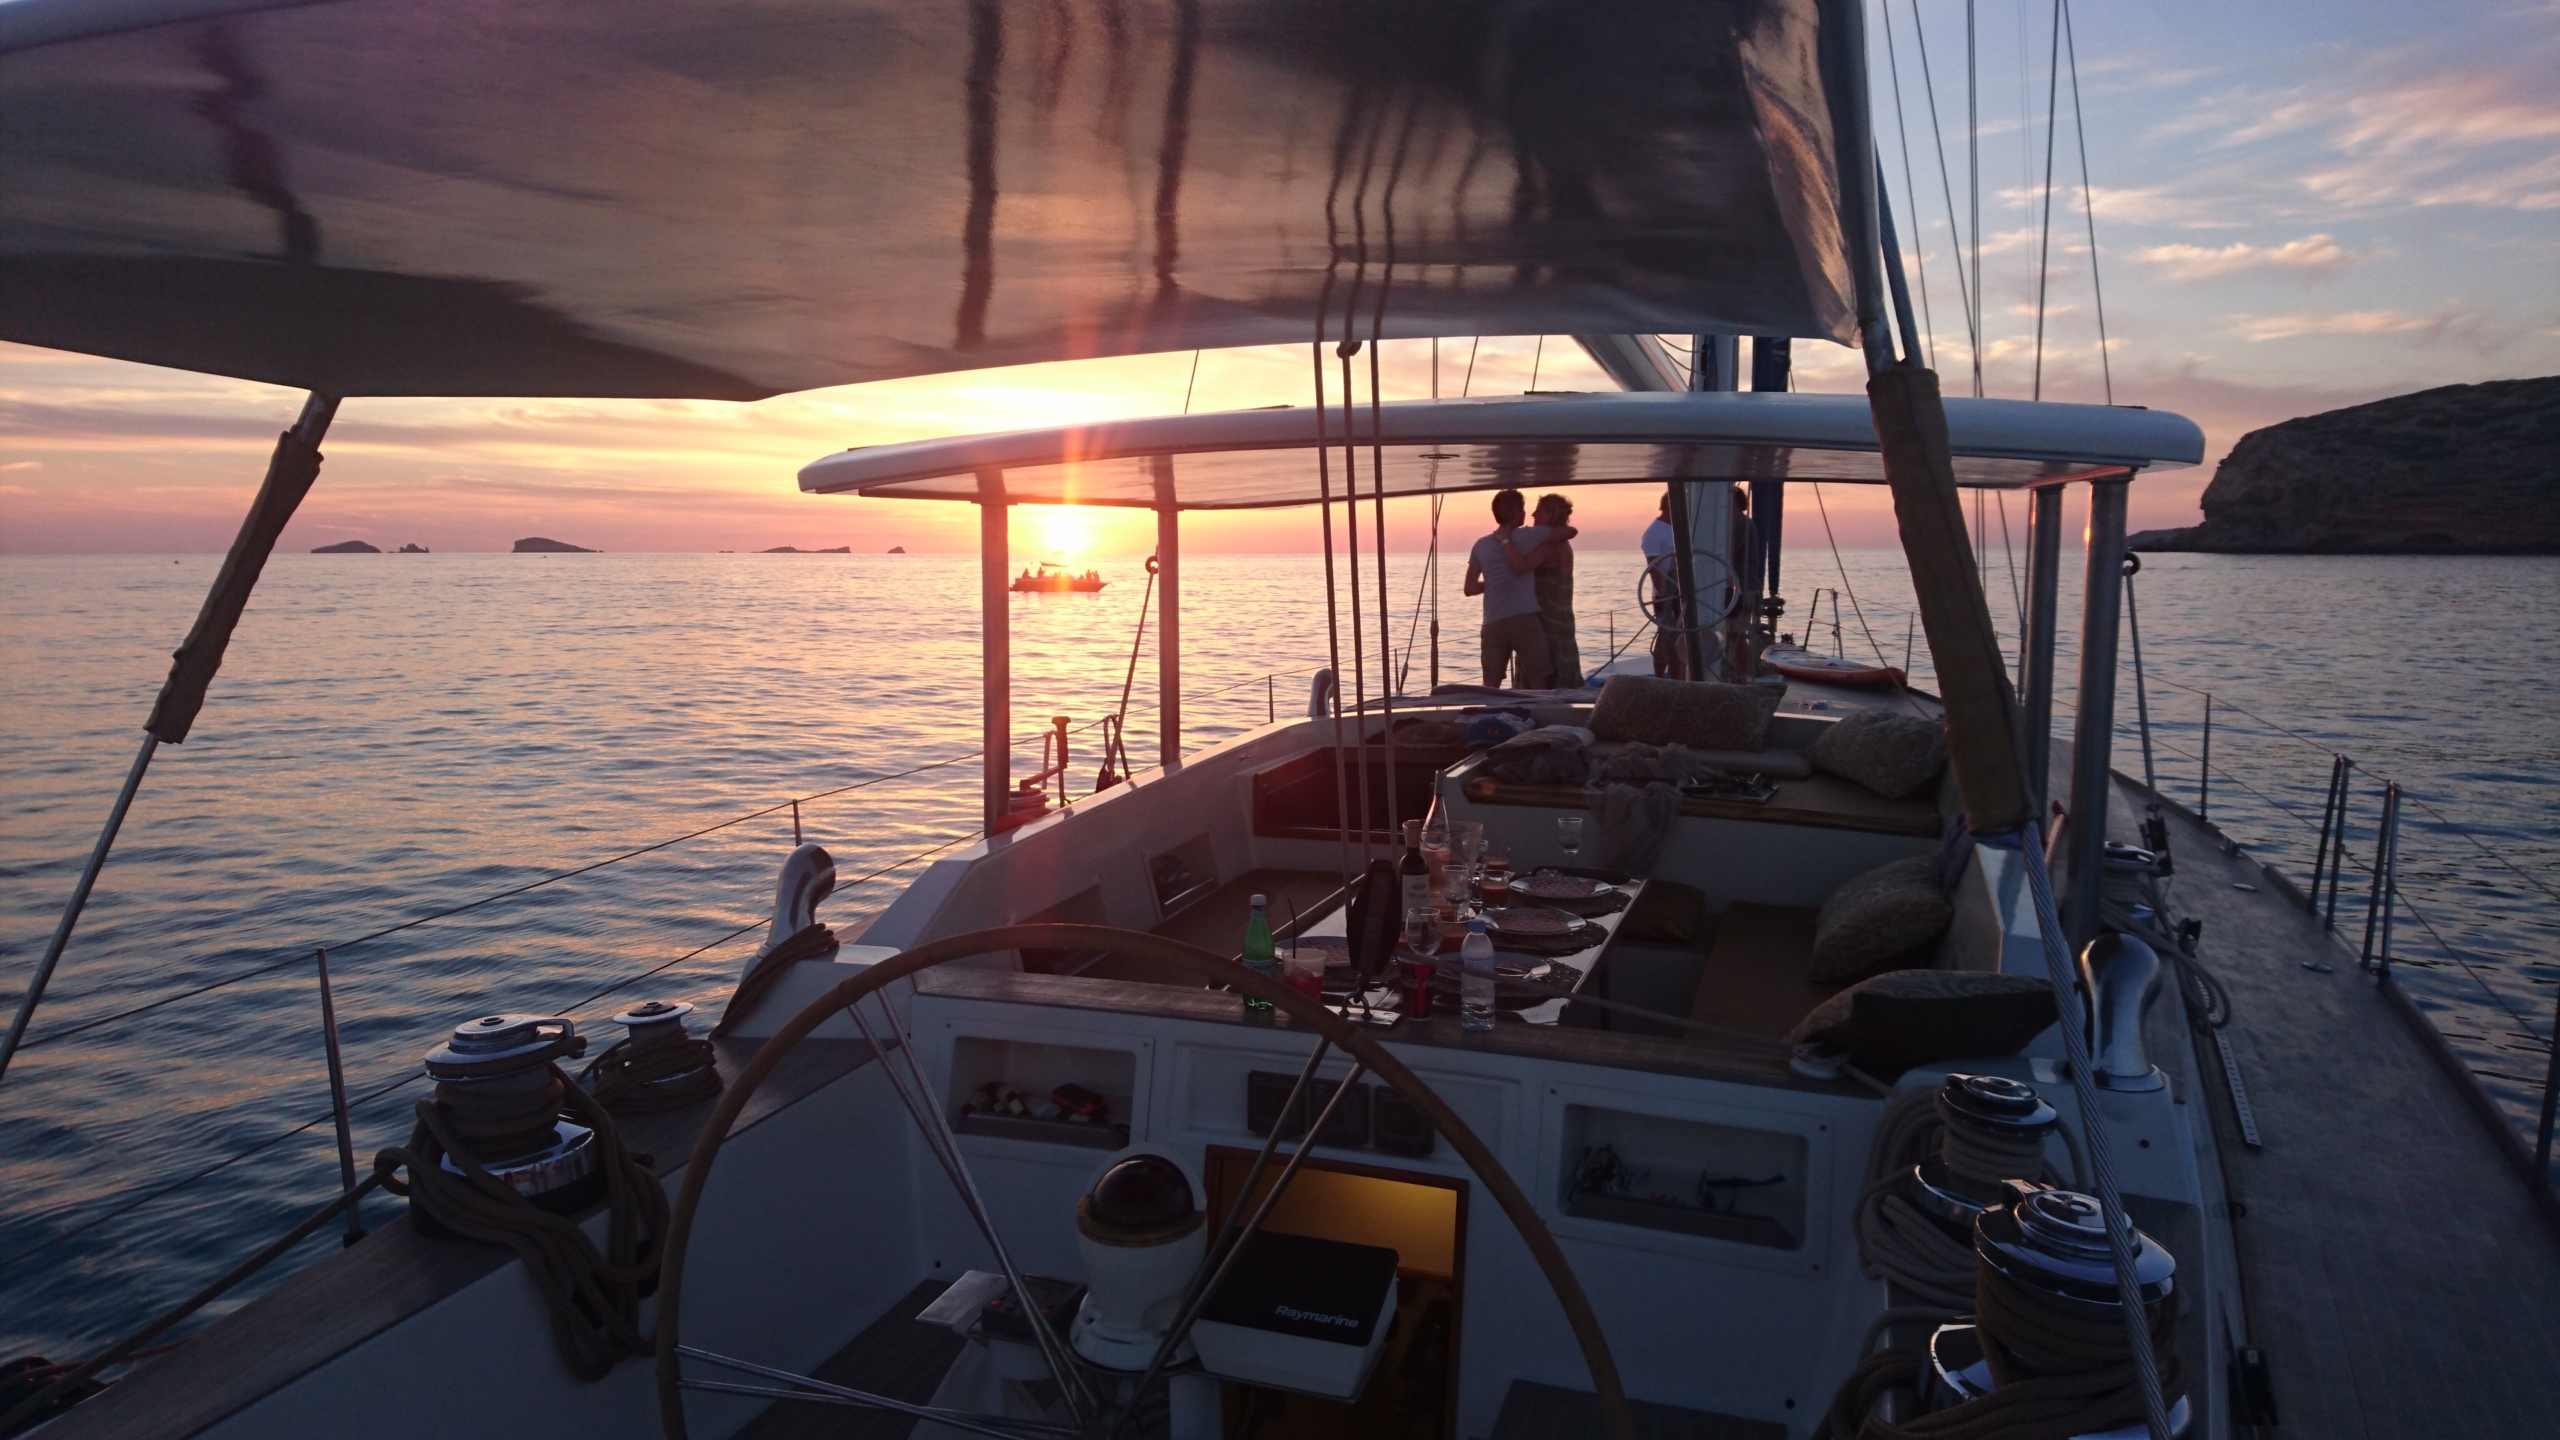 Voyager-Dreams-Geoff-Parsons-Yacht-For-Charter-Sunset-Lifestyle